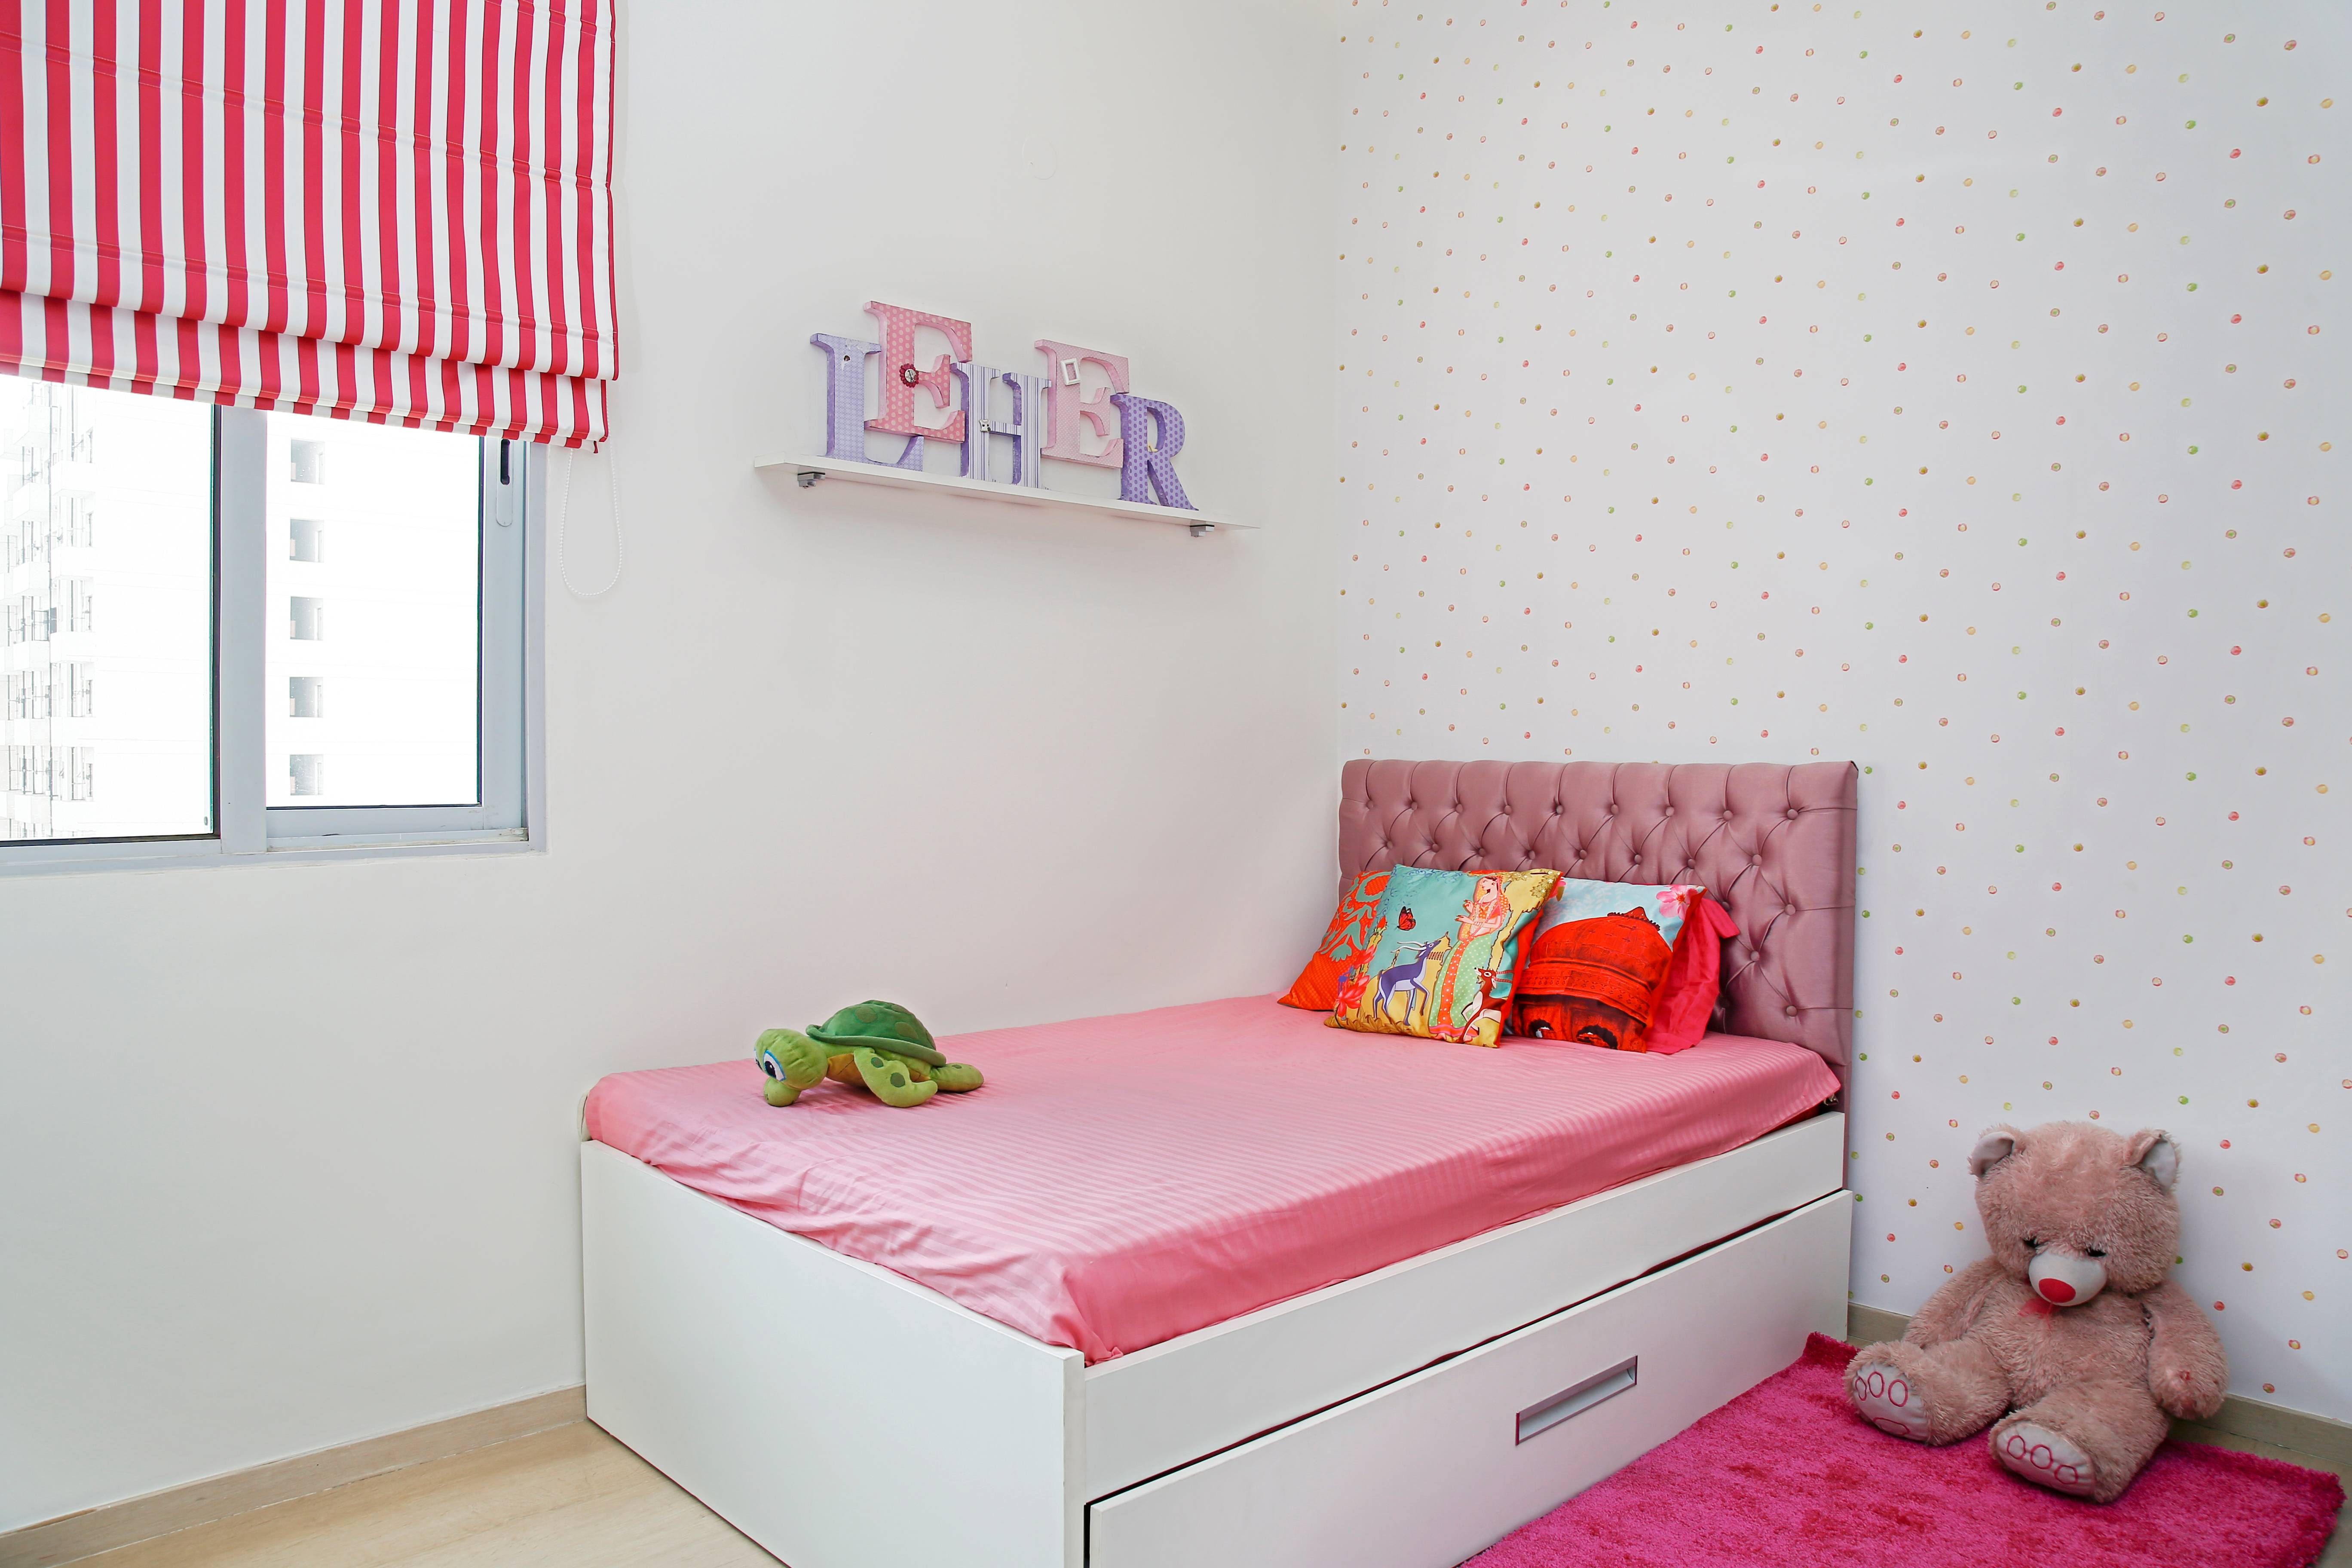 Modern Kids Room Design With A single Bed With Built-In Storage